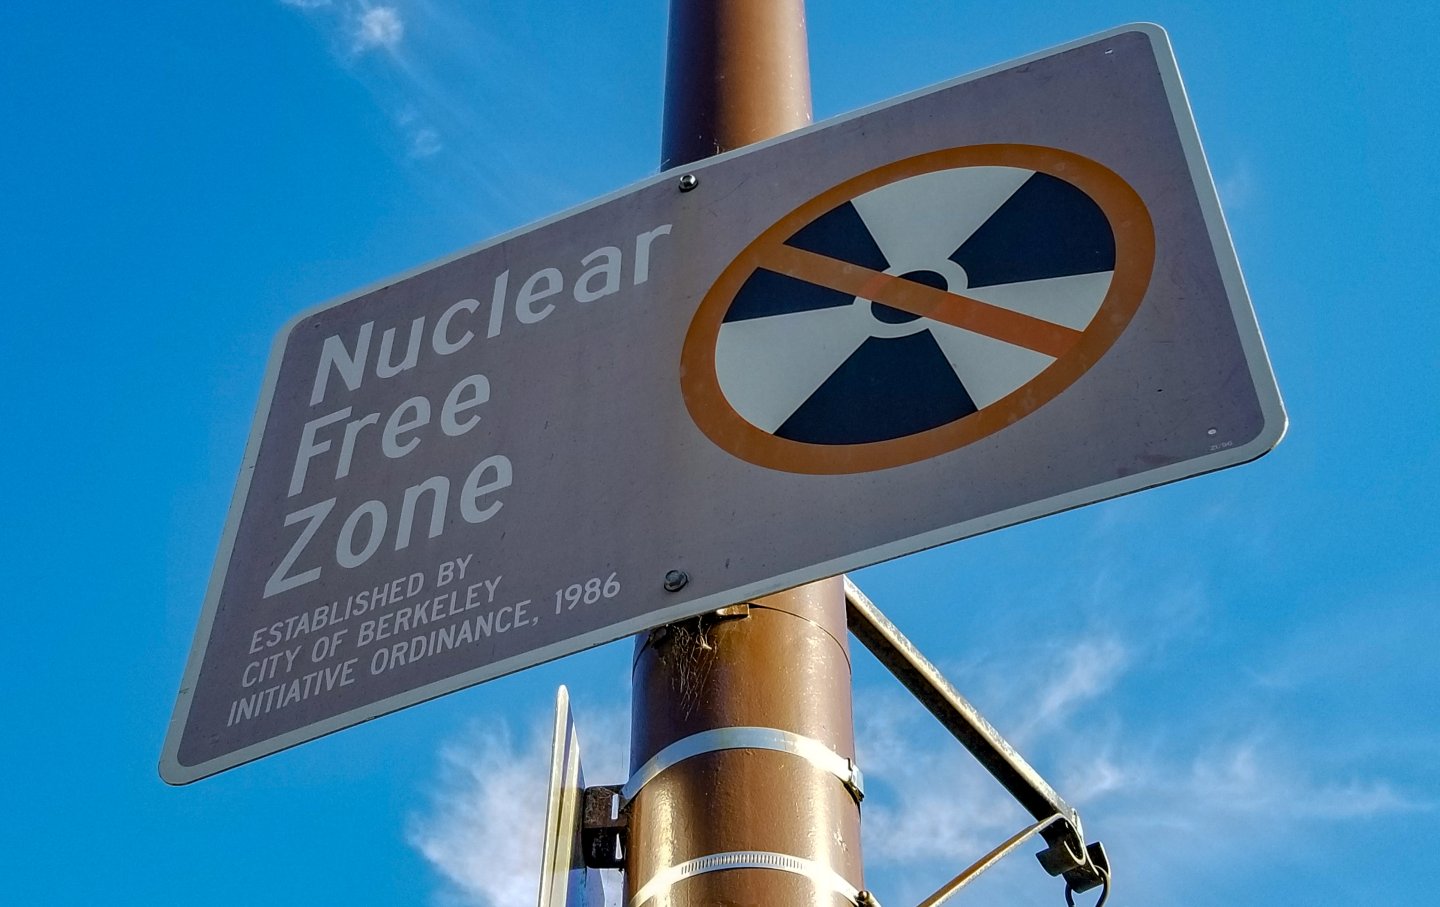 Our Nation Needs a Wake-Up Call to the Nuclear Threat